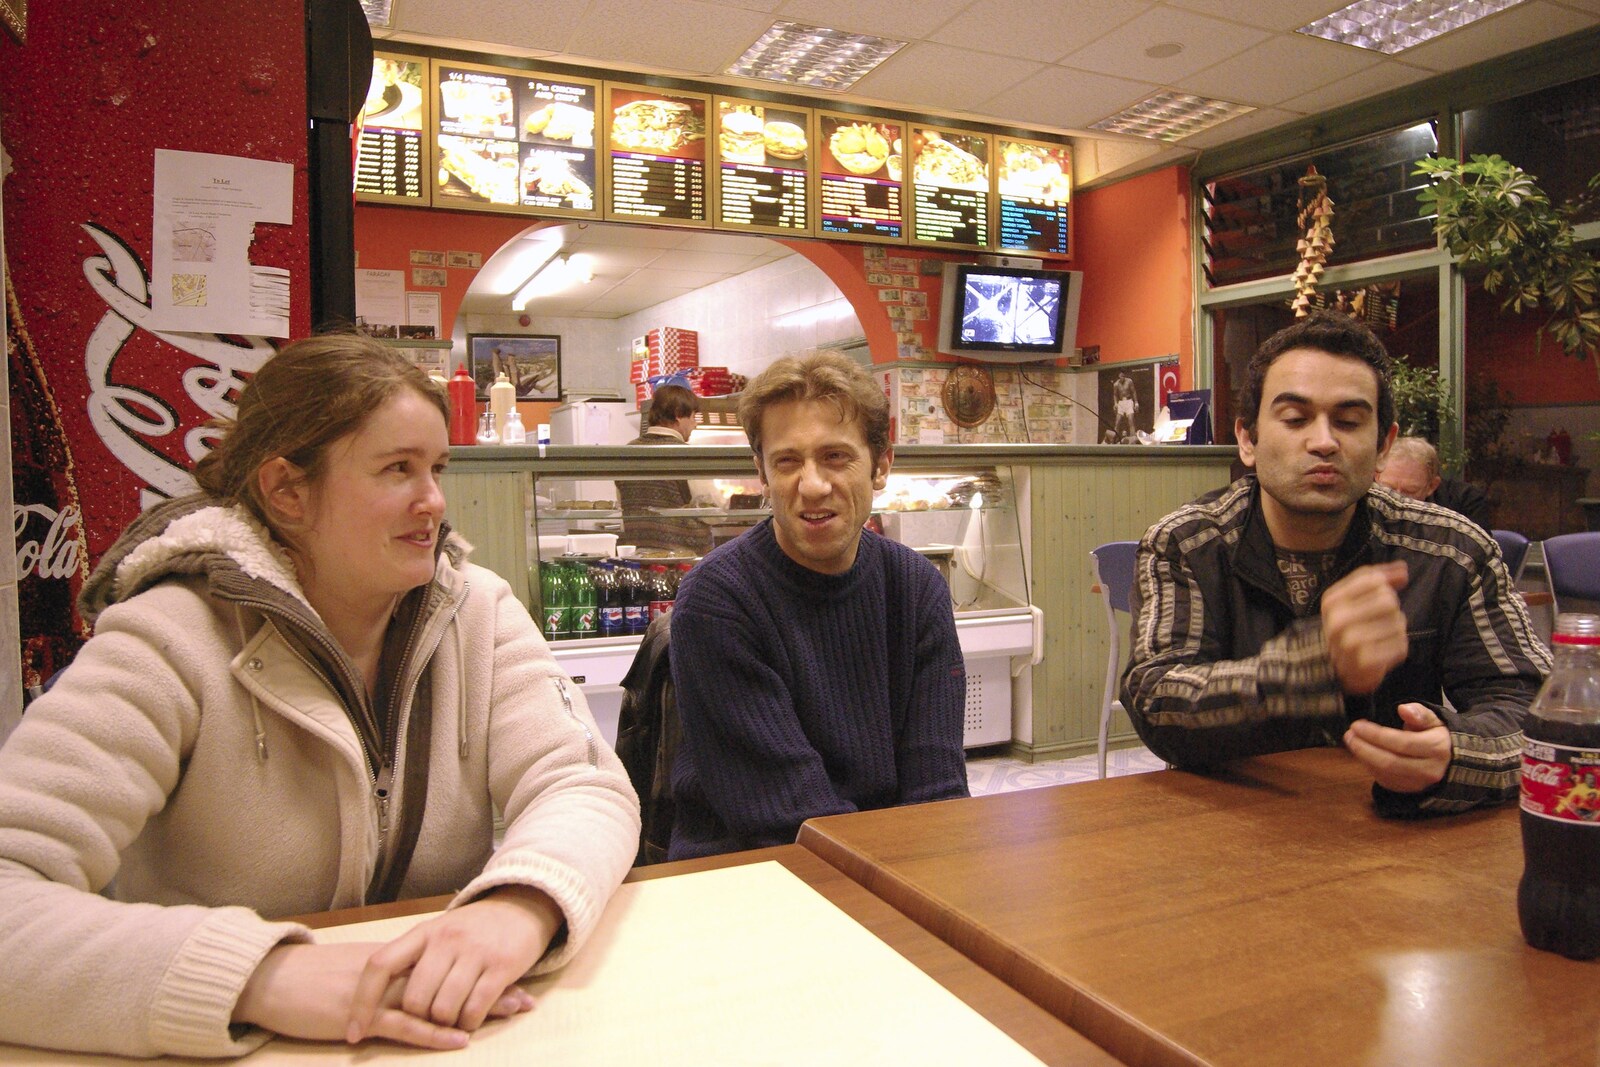 There's a stop at 'Carlos Kebab King' on Mill Road from Hani Leaves The Lab, Alexandra Arms, Cambridge - 23rd February 2007